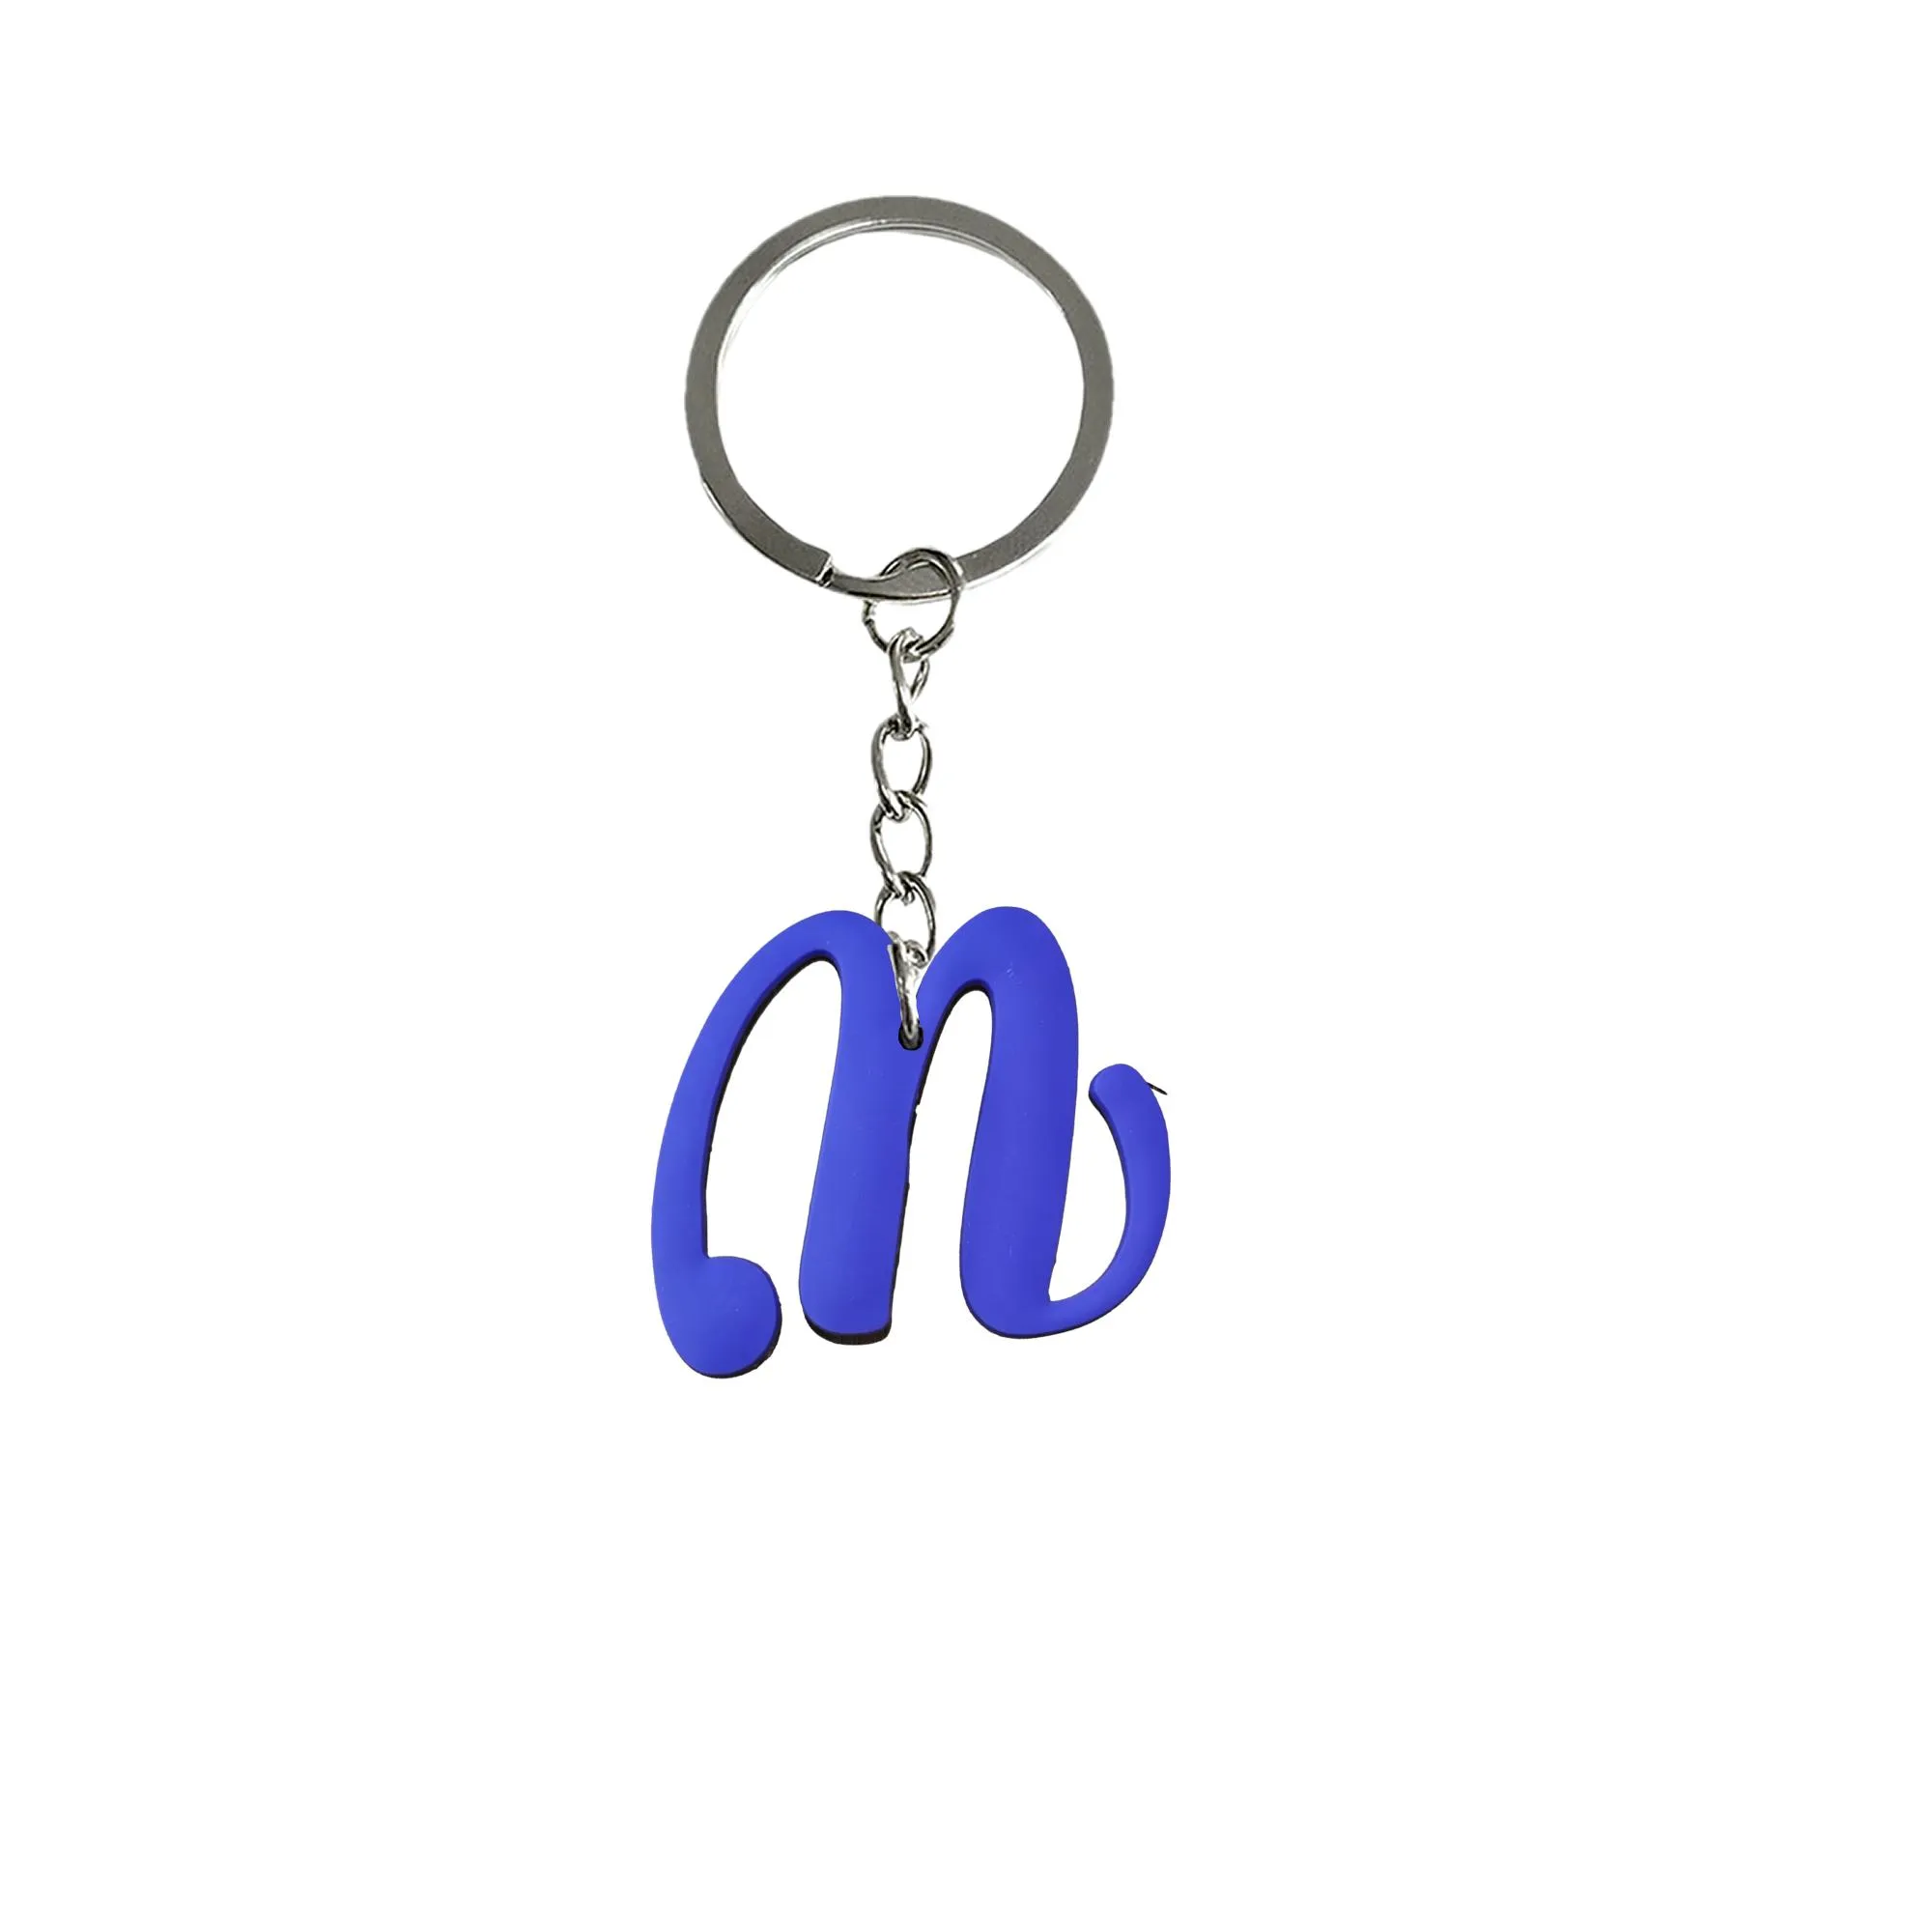 purple large letters keychain keychains tags goodie bag stuffer christmas gifts and holiday charms keyring for classroom school day birthday party supplies gift suitable schoolbag girls key chain ring fans men